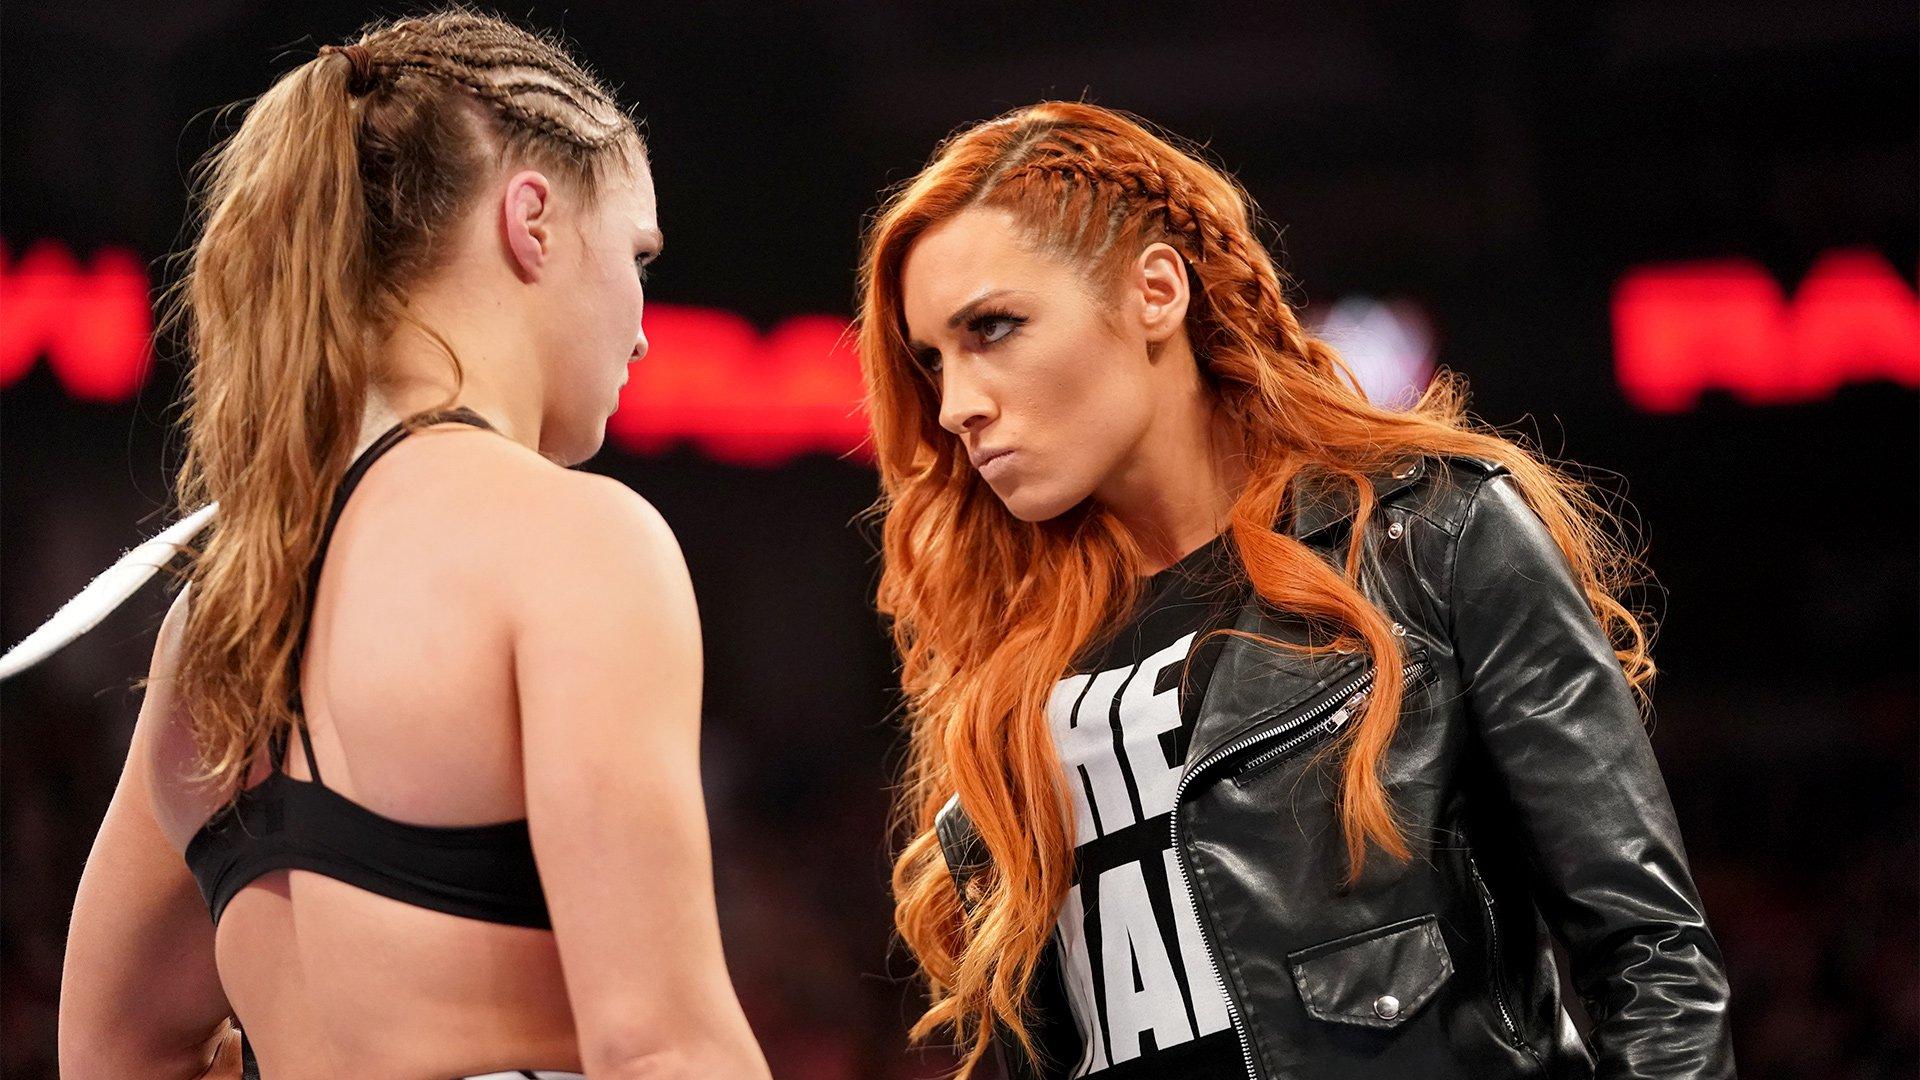 Becky Lynch reveals she will challenge Ronda Rousey at WrestleMania